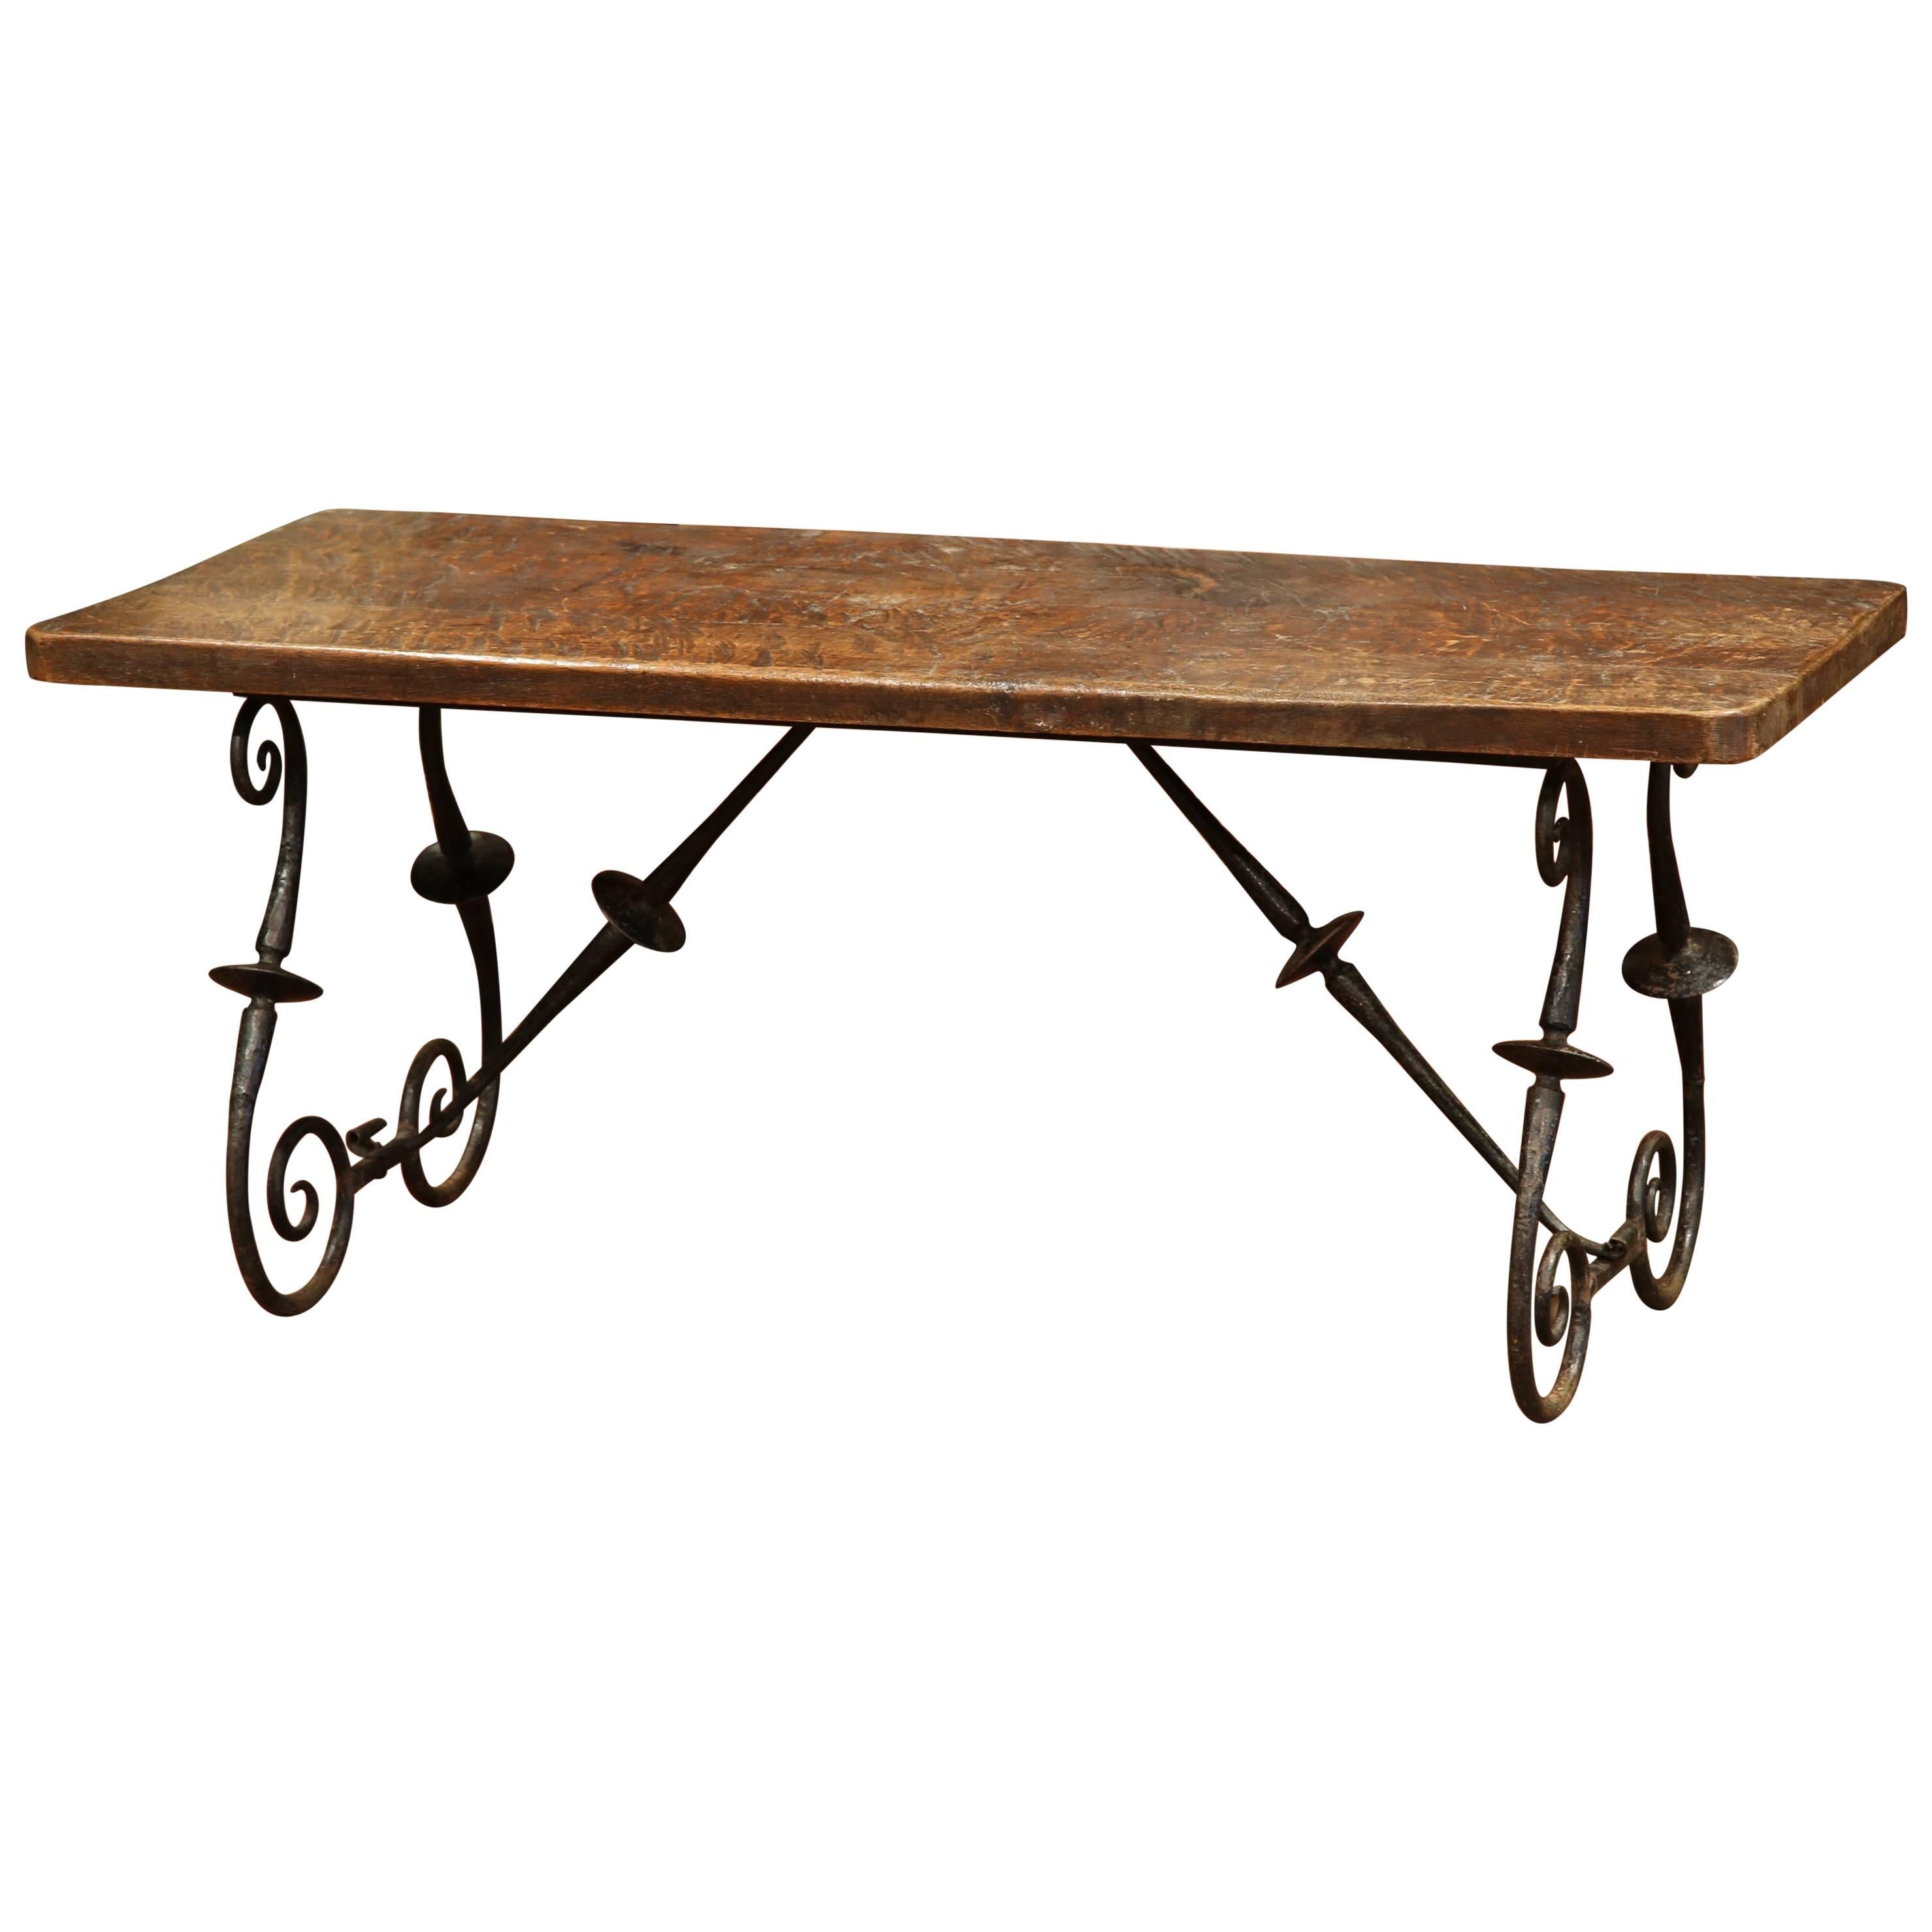 19th Century Spanish Walnut Coffee Table with Iron Legs and Stretcher